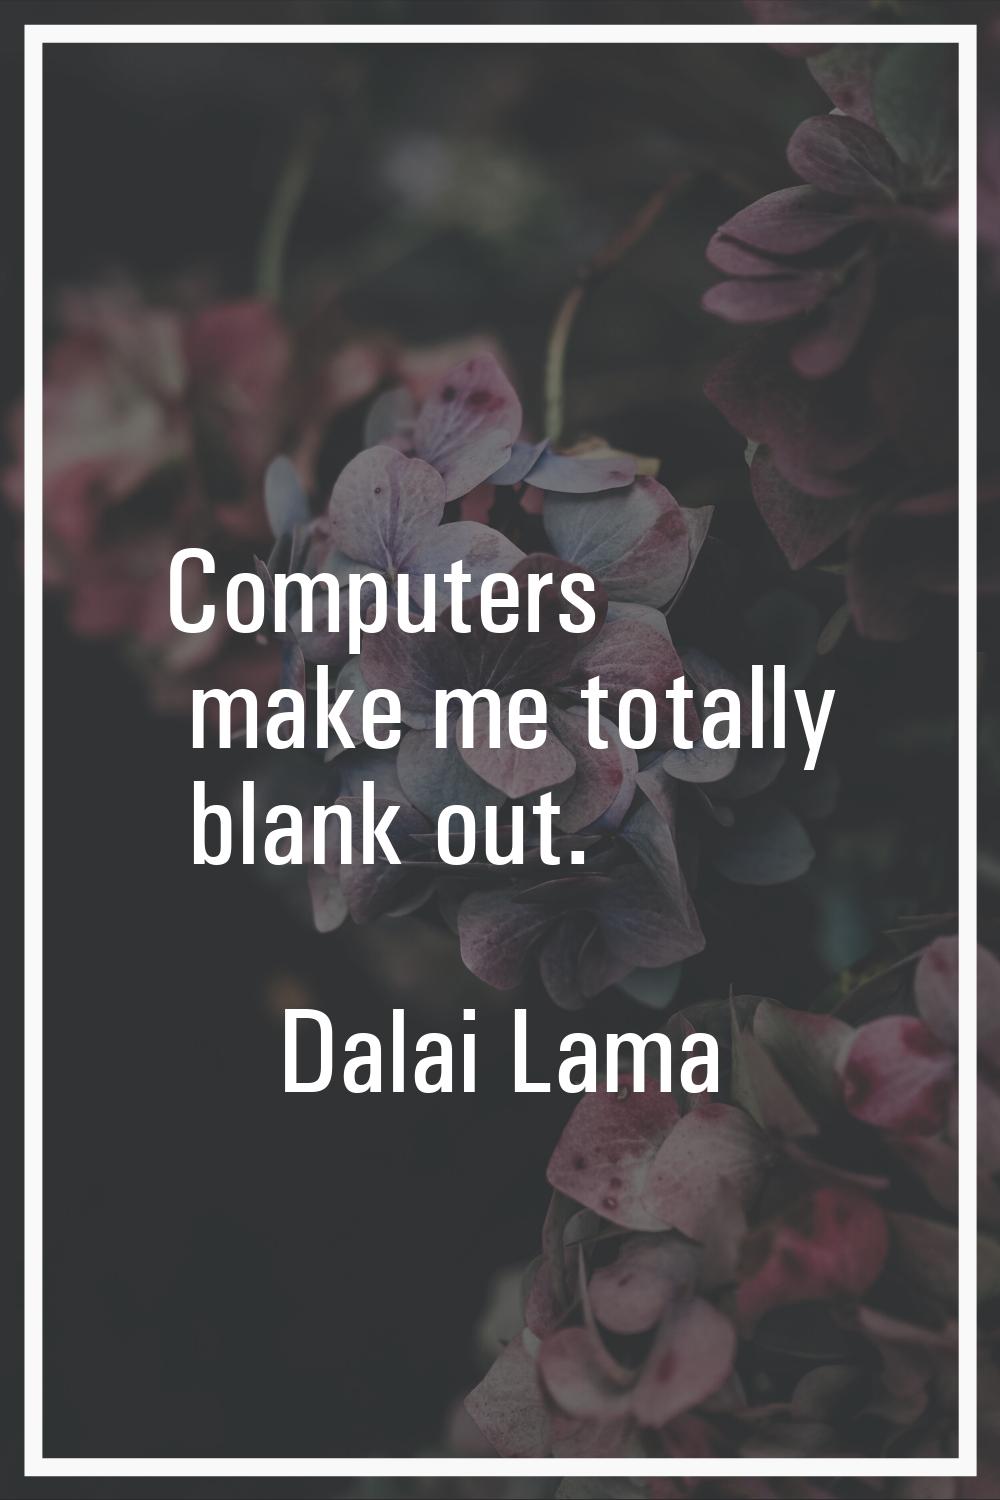 Computers make me totally blank out.